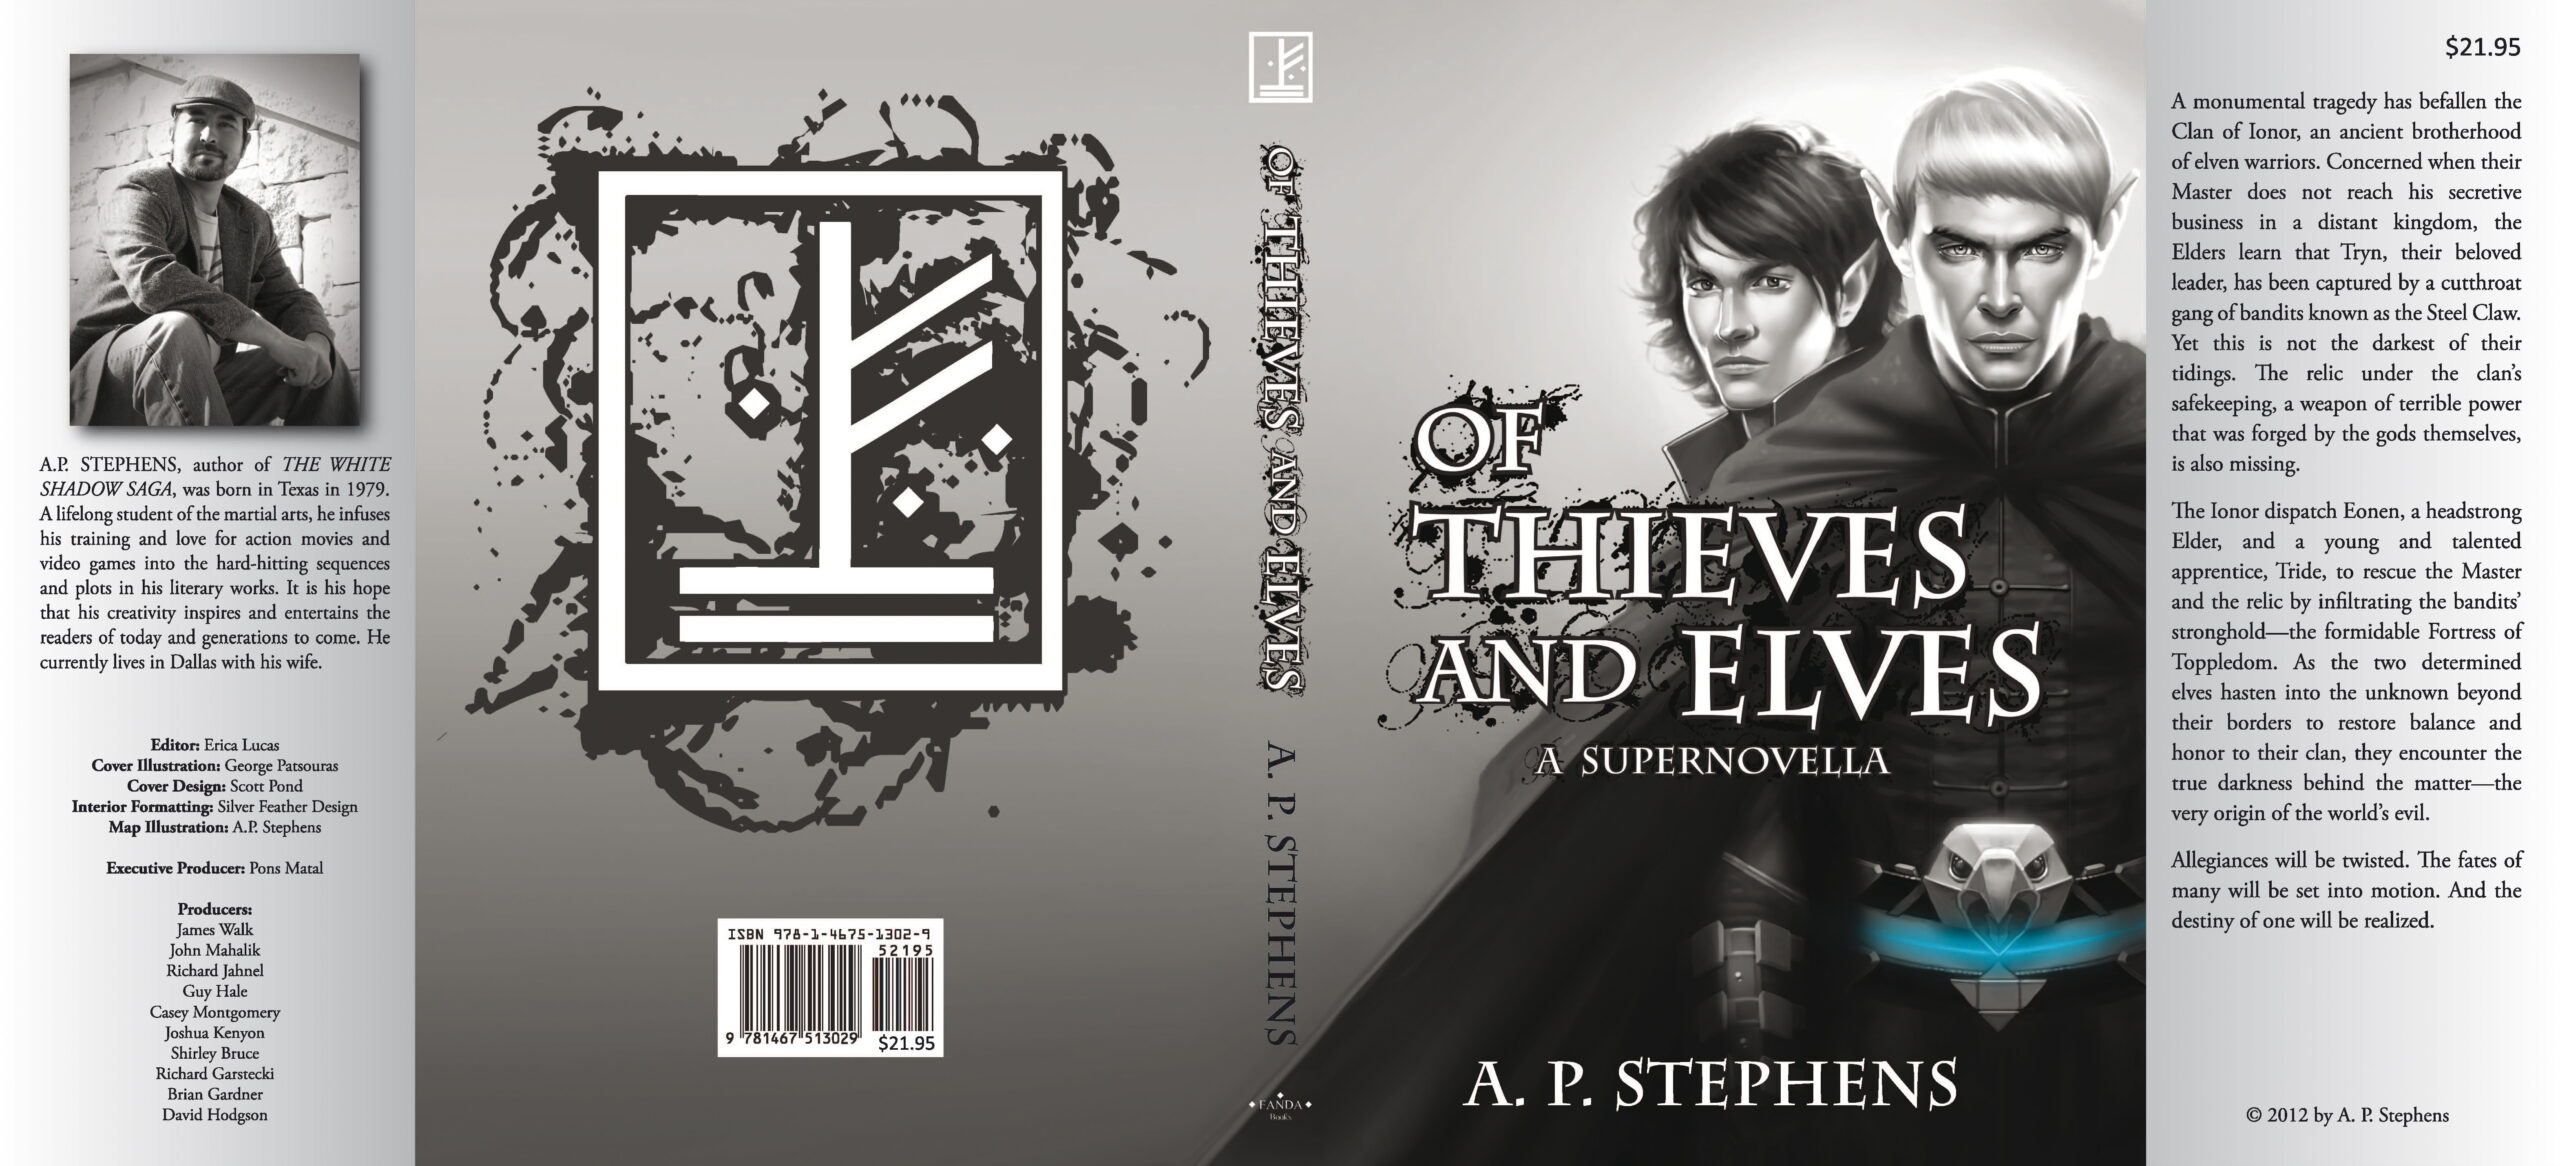 Of-Thieves-and-Elves-01